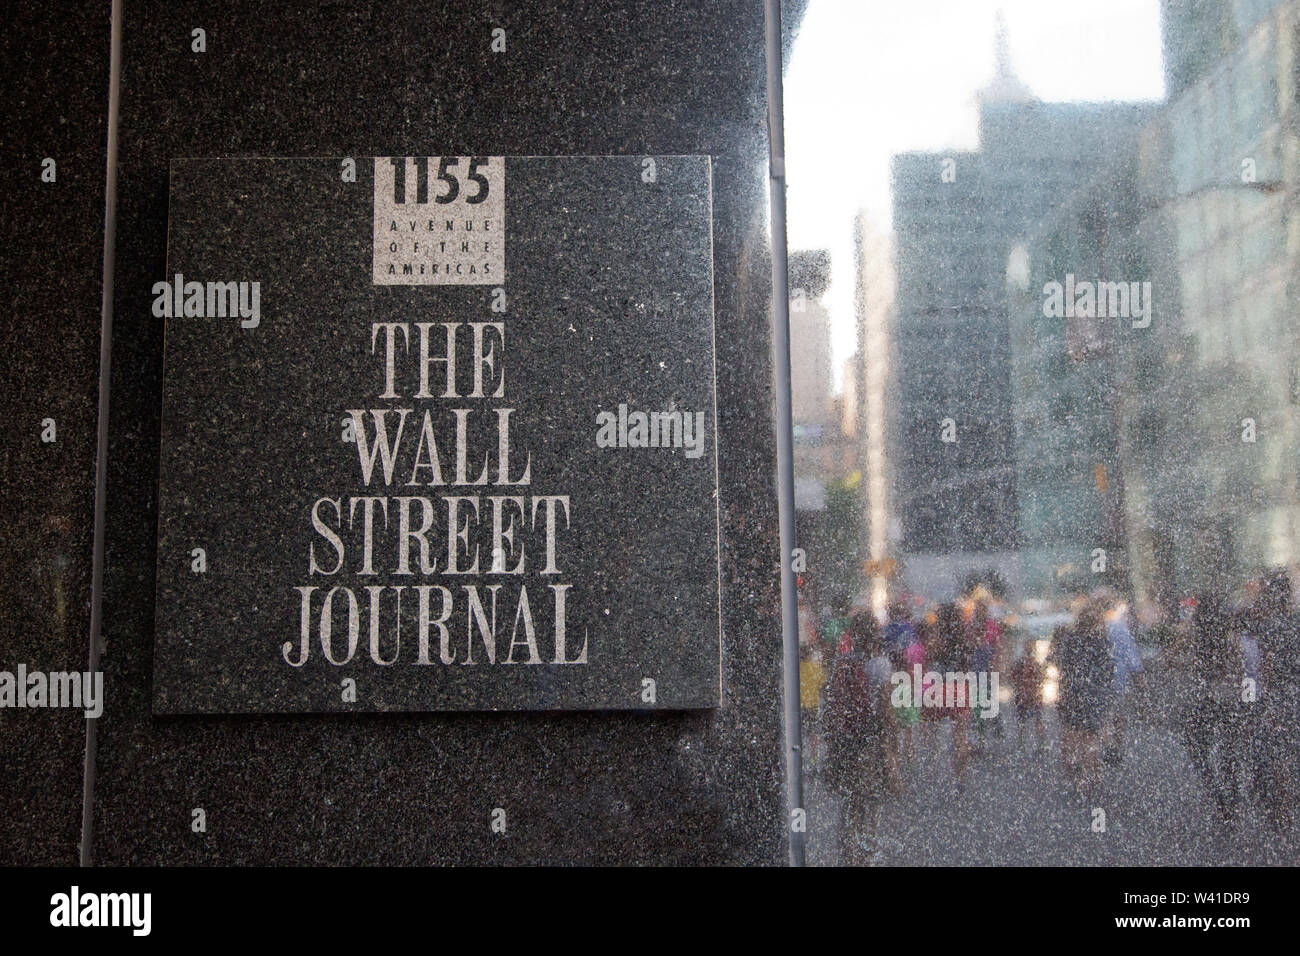 The Wall Street Journal sign in its building Stock Photo